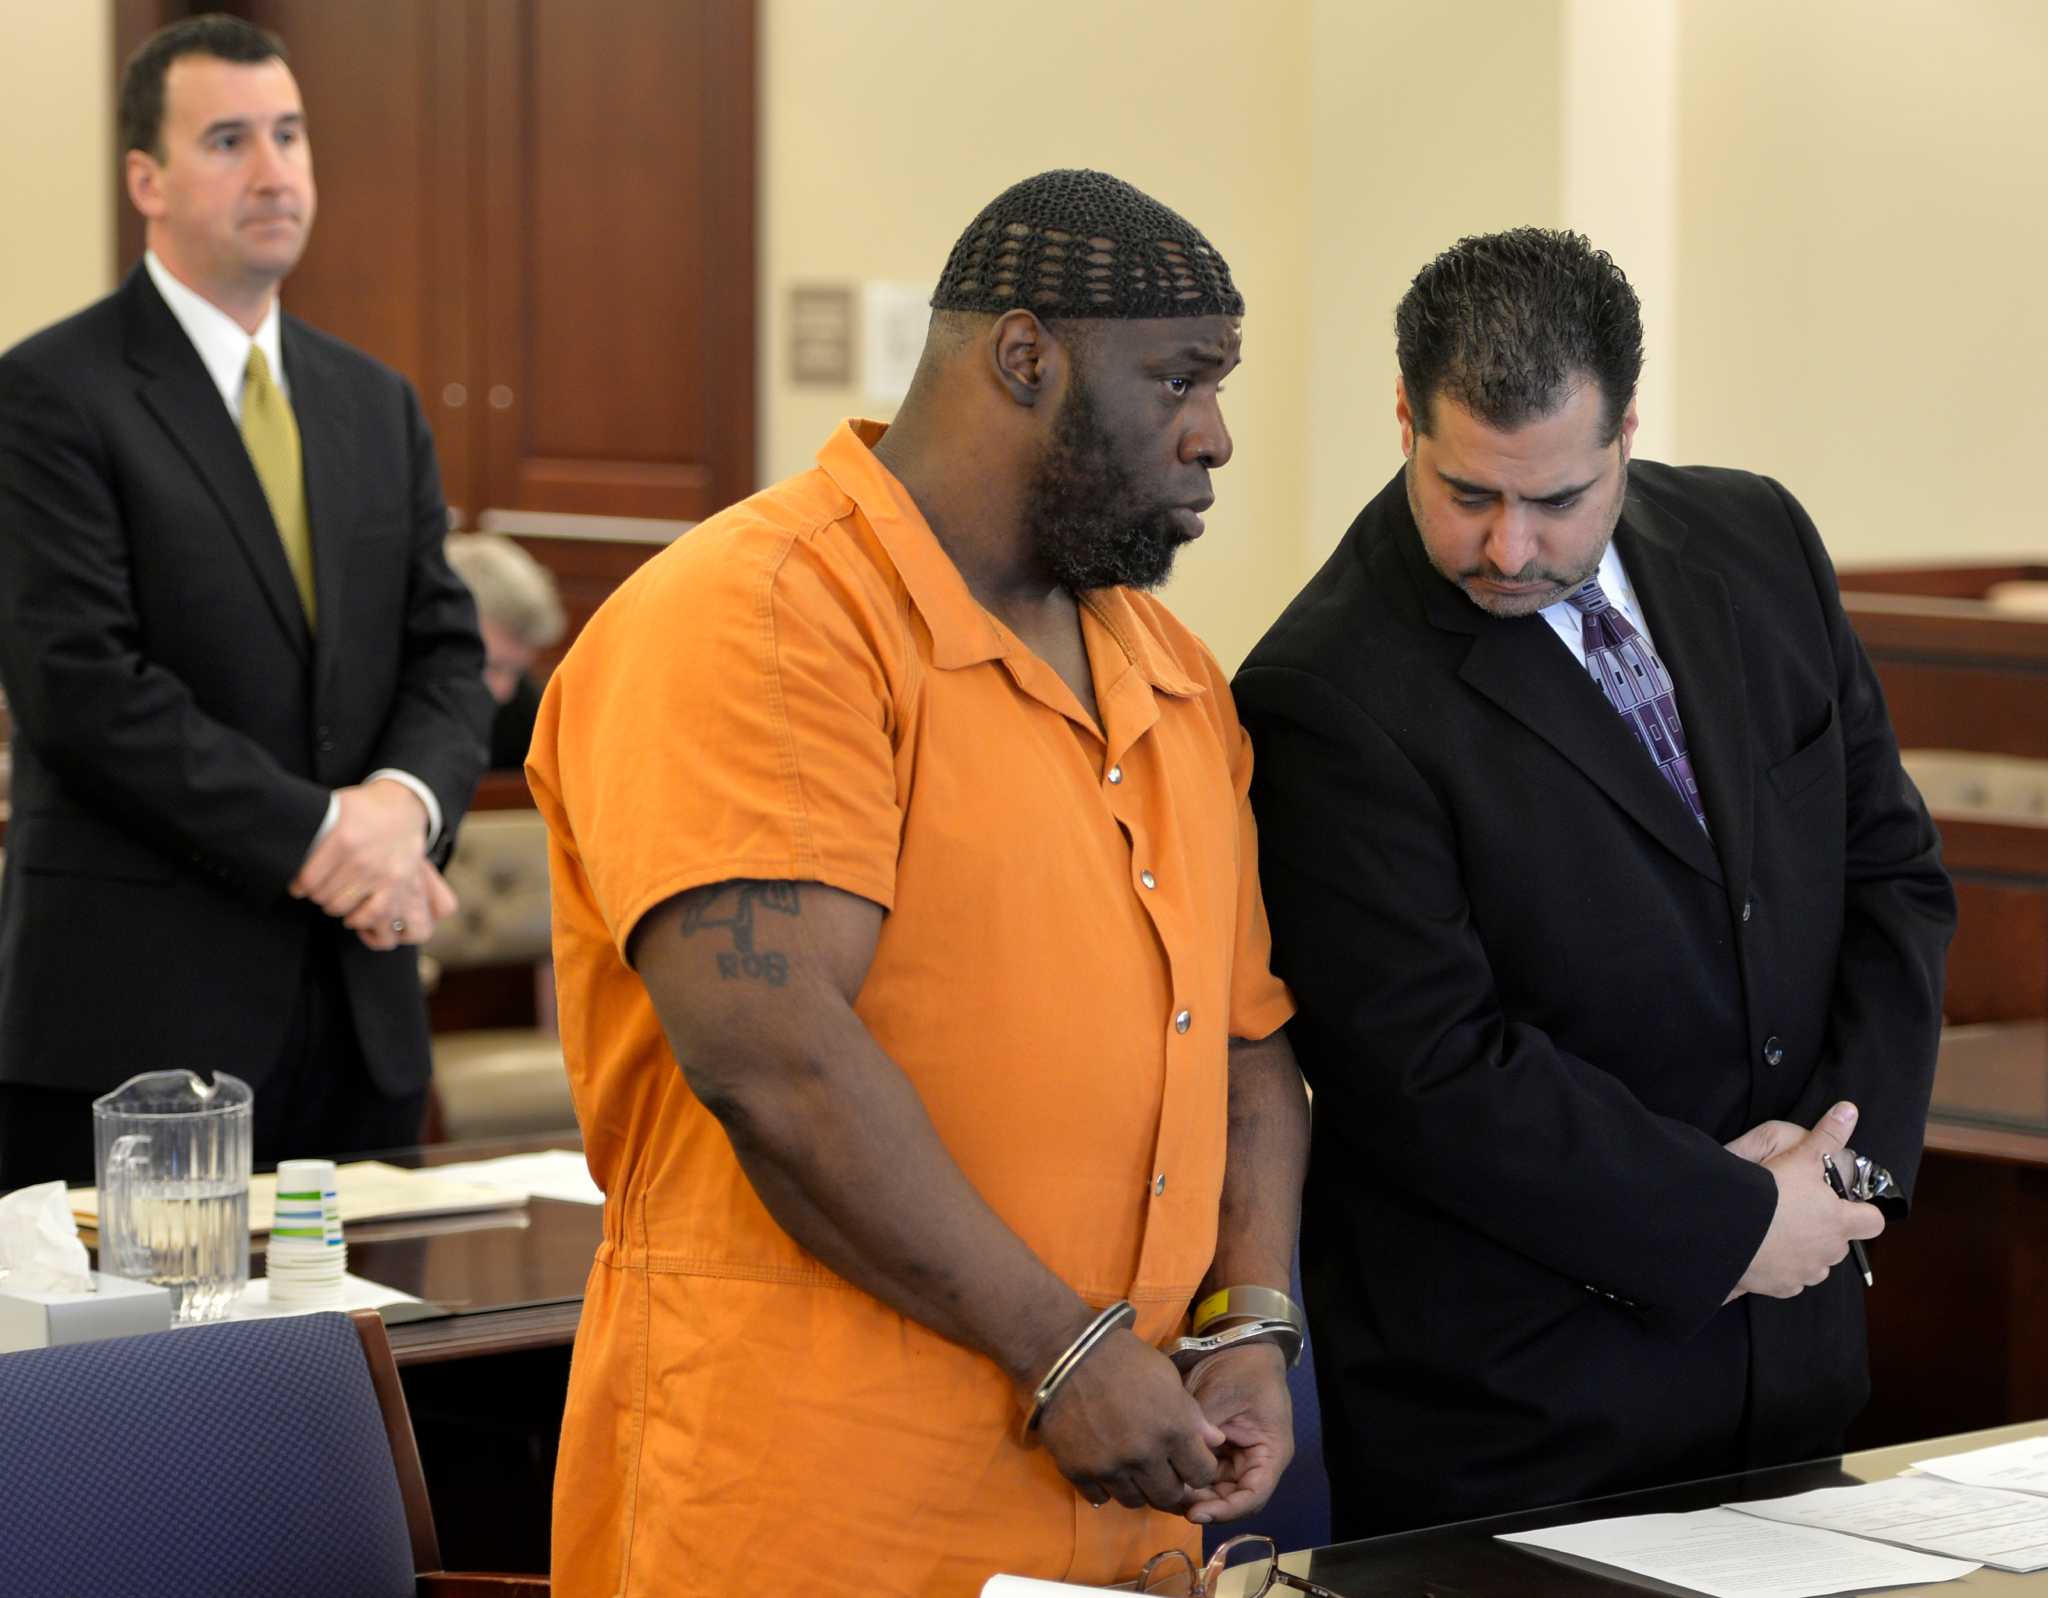 Albany Man Gets 25 Years To Life For Killing His Wife And Stern Lecture From The Judge